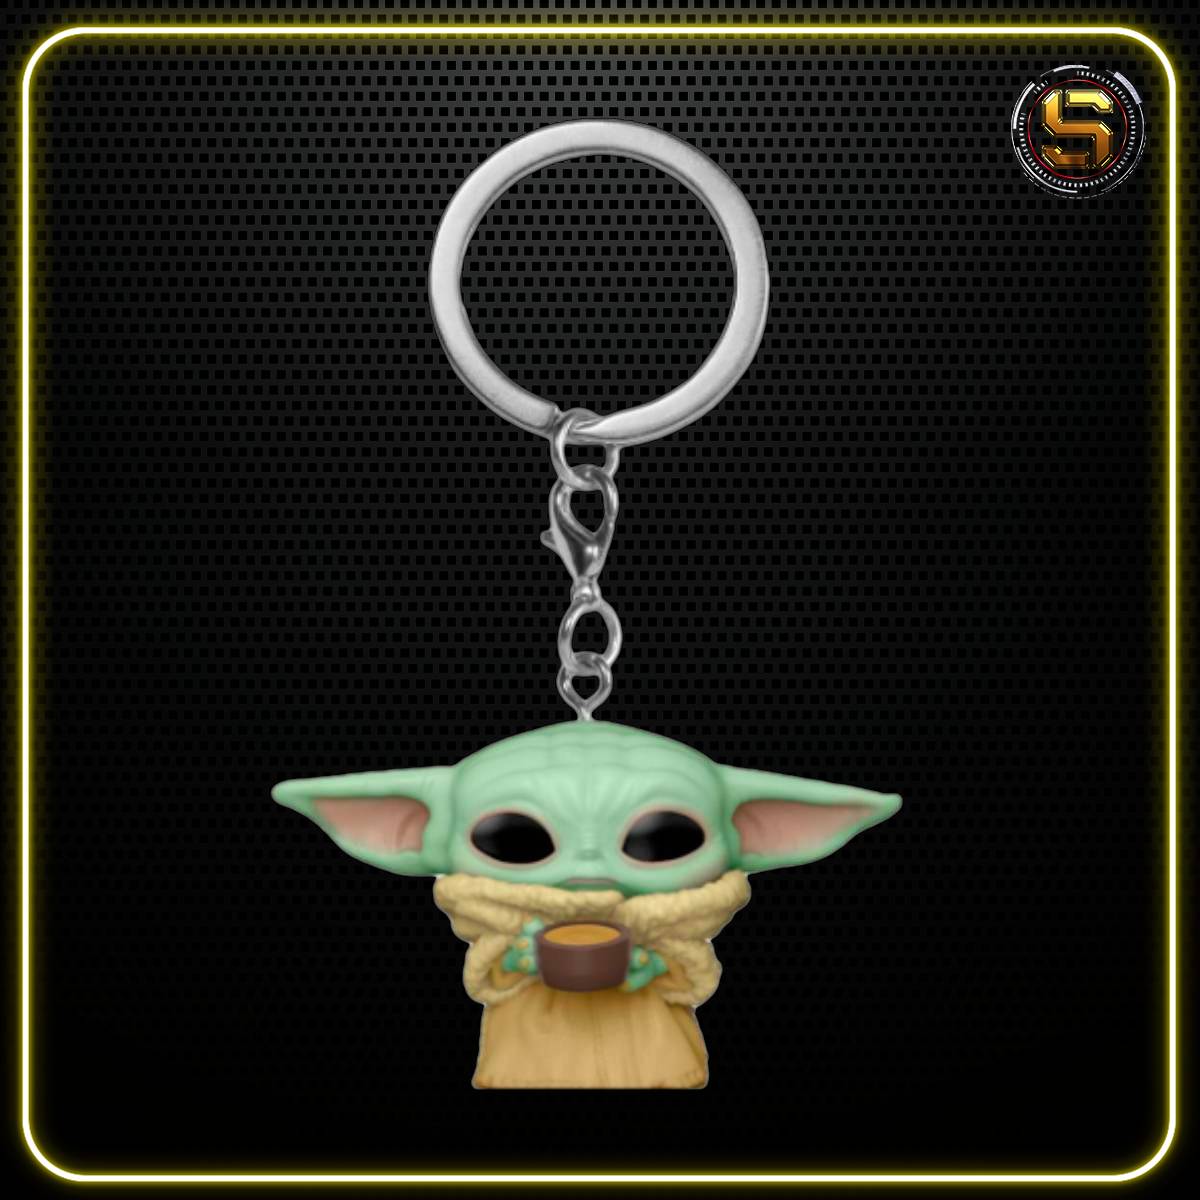 FUNKO KEYCHAIN STAR WARS THE MANDALORIAN THE CHILD WITH CUP